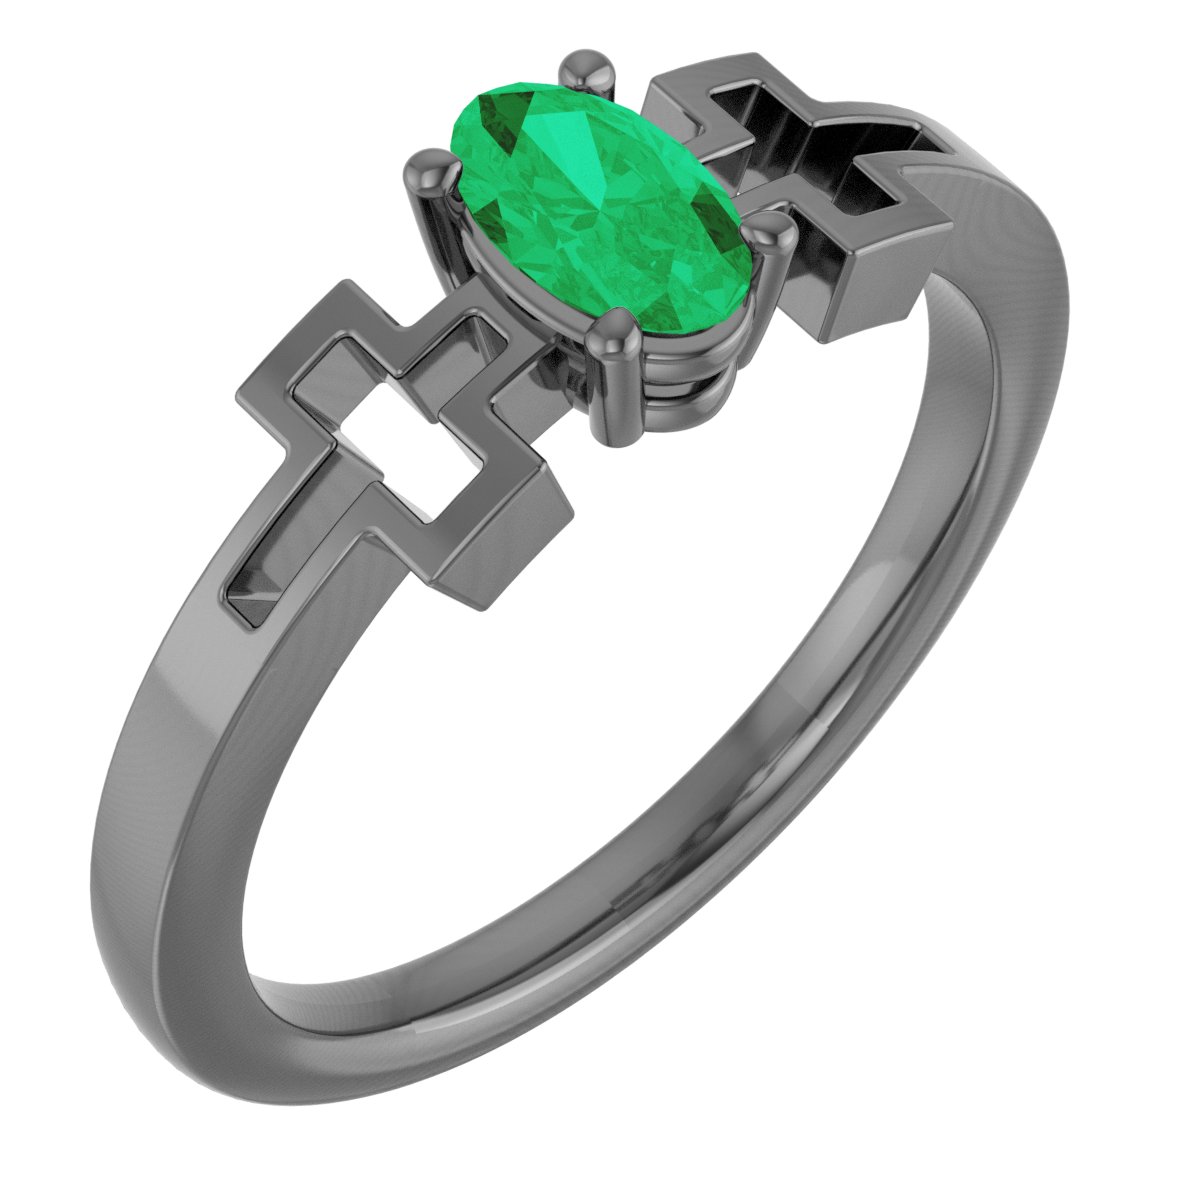 14K Yellow Chatham Created Emerald Solitaire Cross Youth Ring